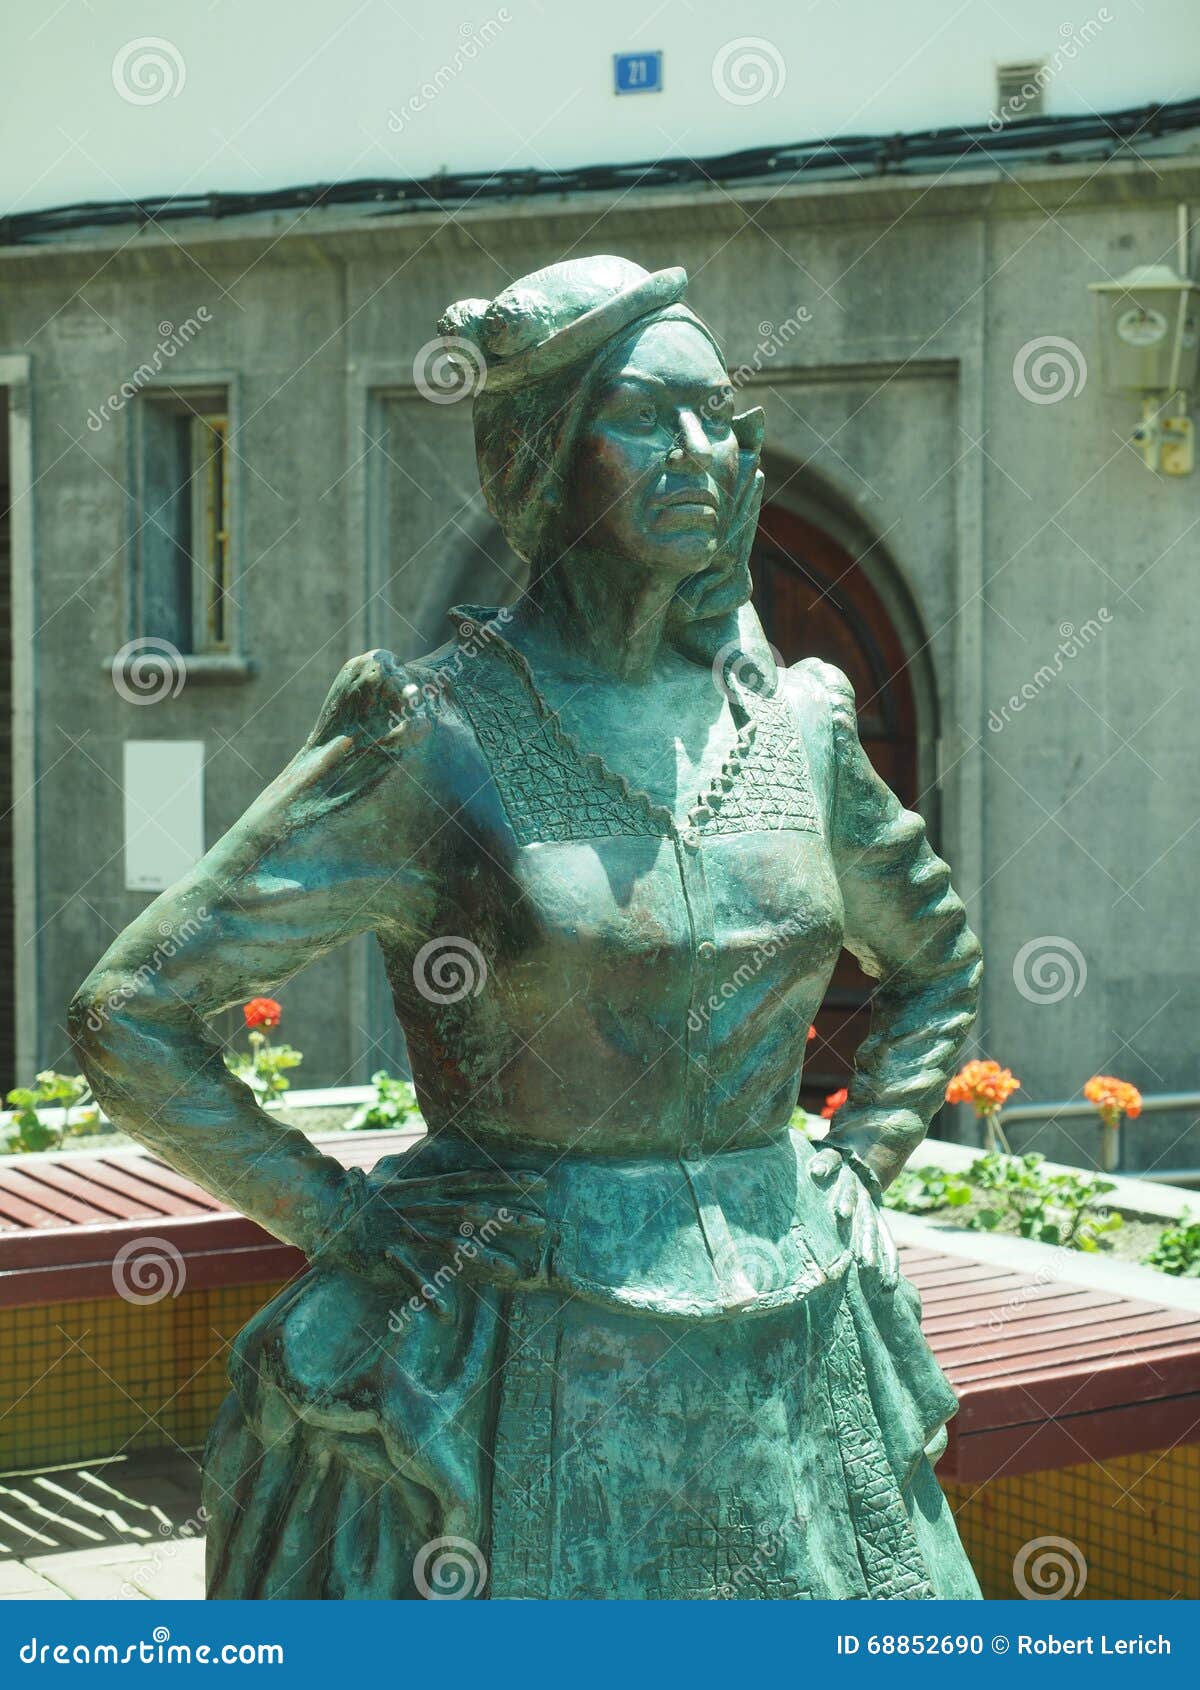 statue of singer mary sanchez playa cantera grand canary island